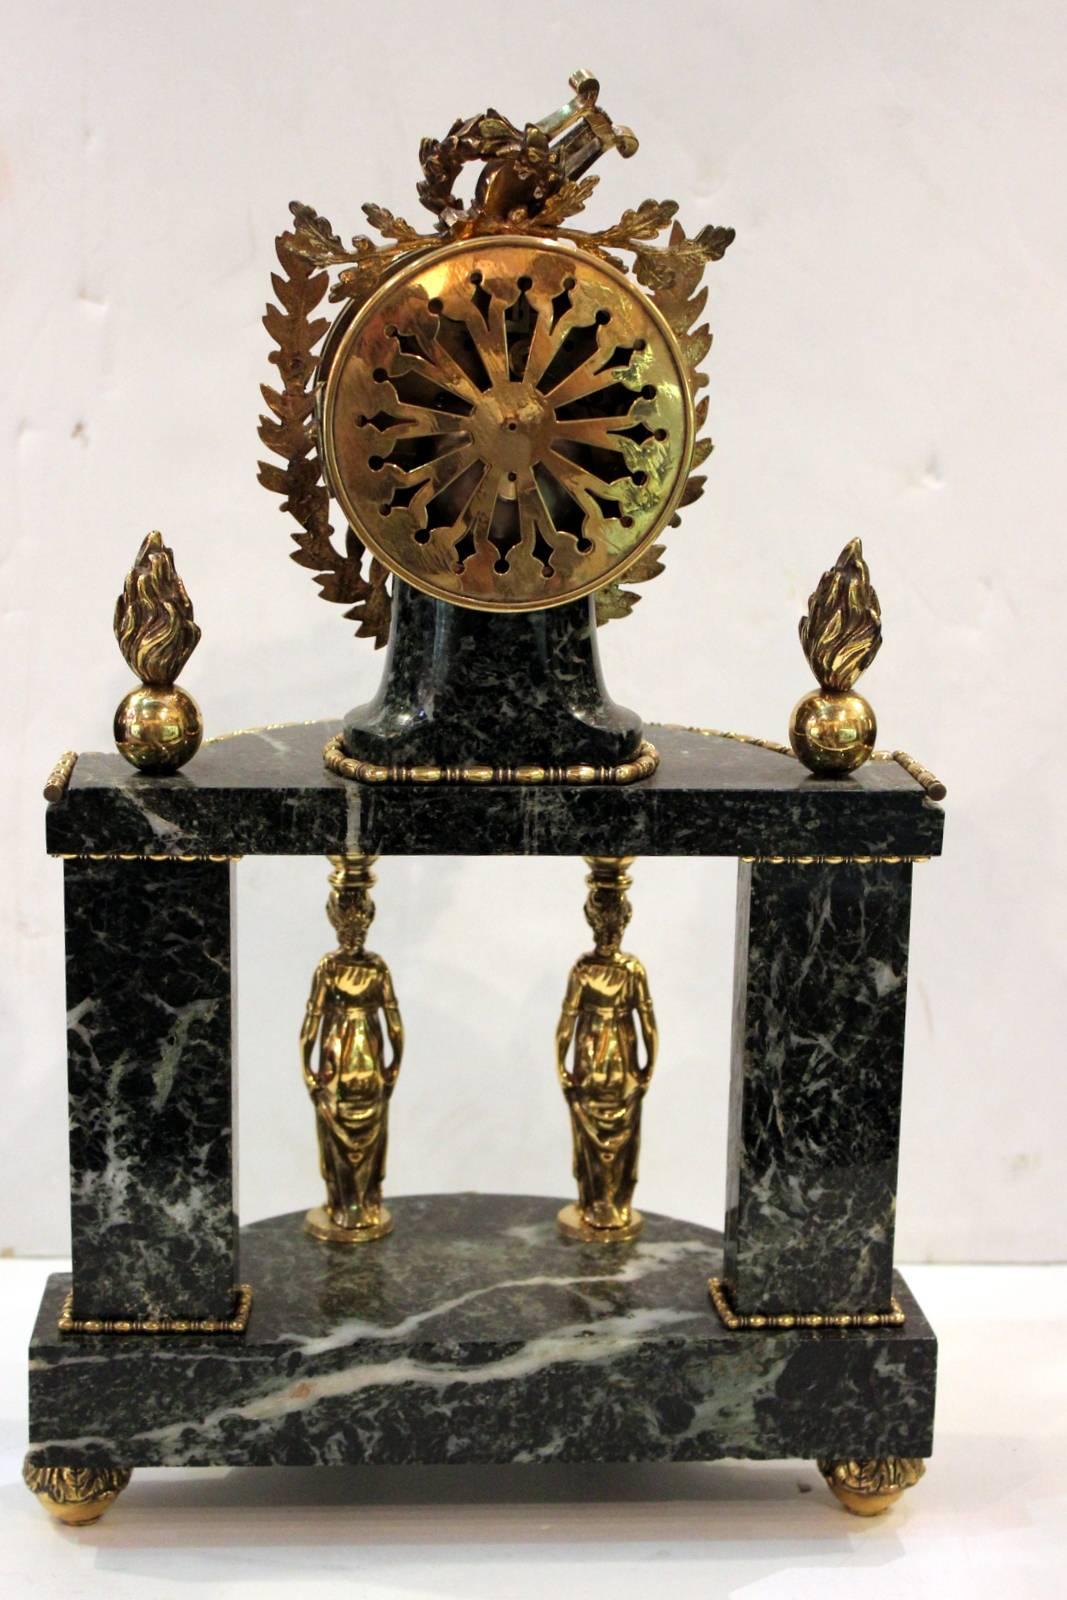 Recently serviced demilune shaped verdigris marble mantel clock. The clock with musical themed finial rests on a columned body consisting of two female figures in a neoclassic style, the back columns are marble with lyre mounts. The entire clock